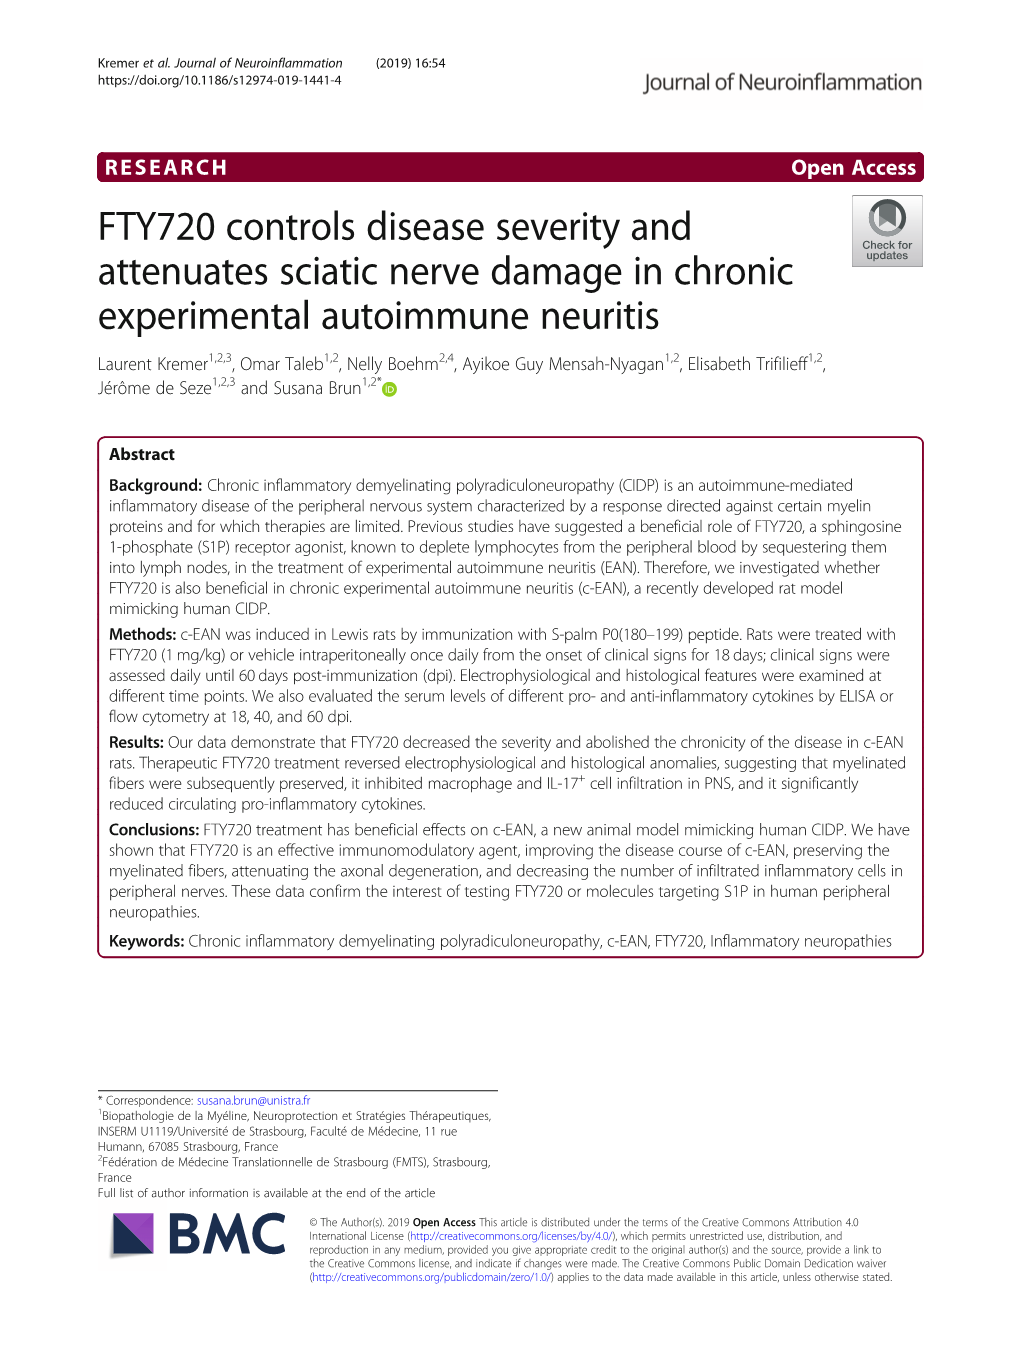 FTY720 Controls Disease Severity and Attenuates Sciatic Nerve Damage In